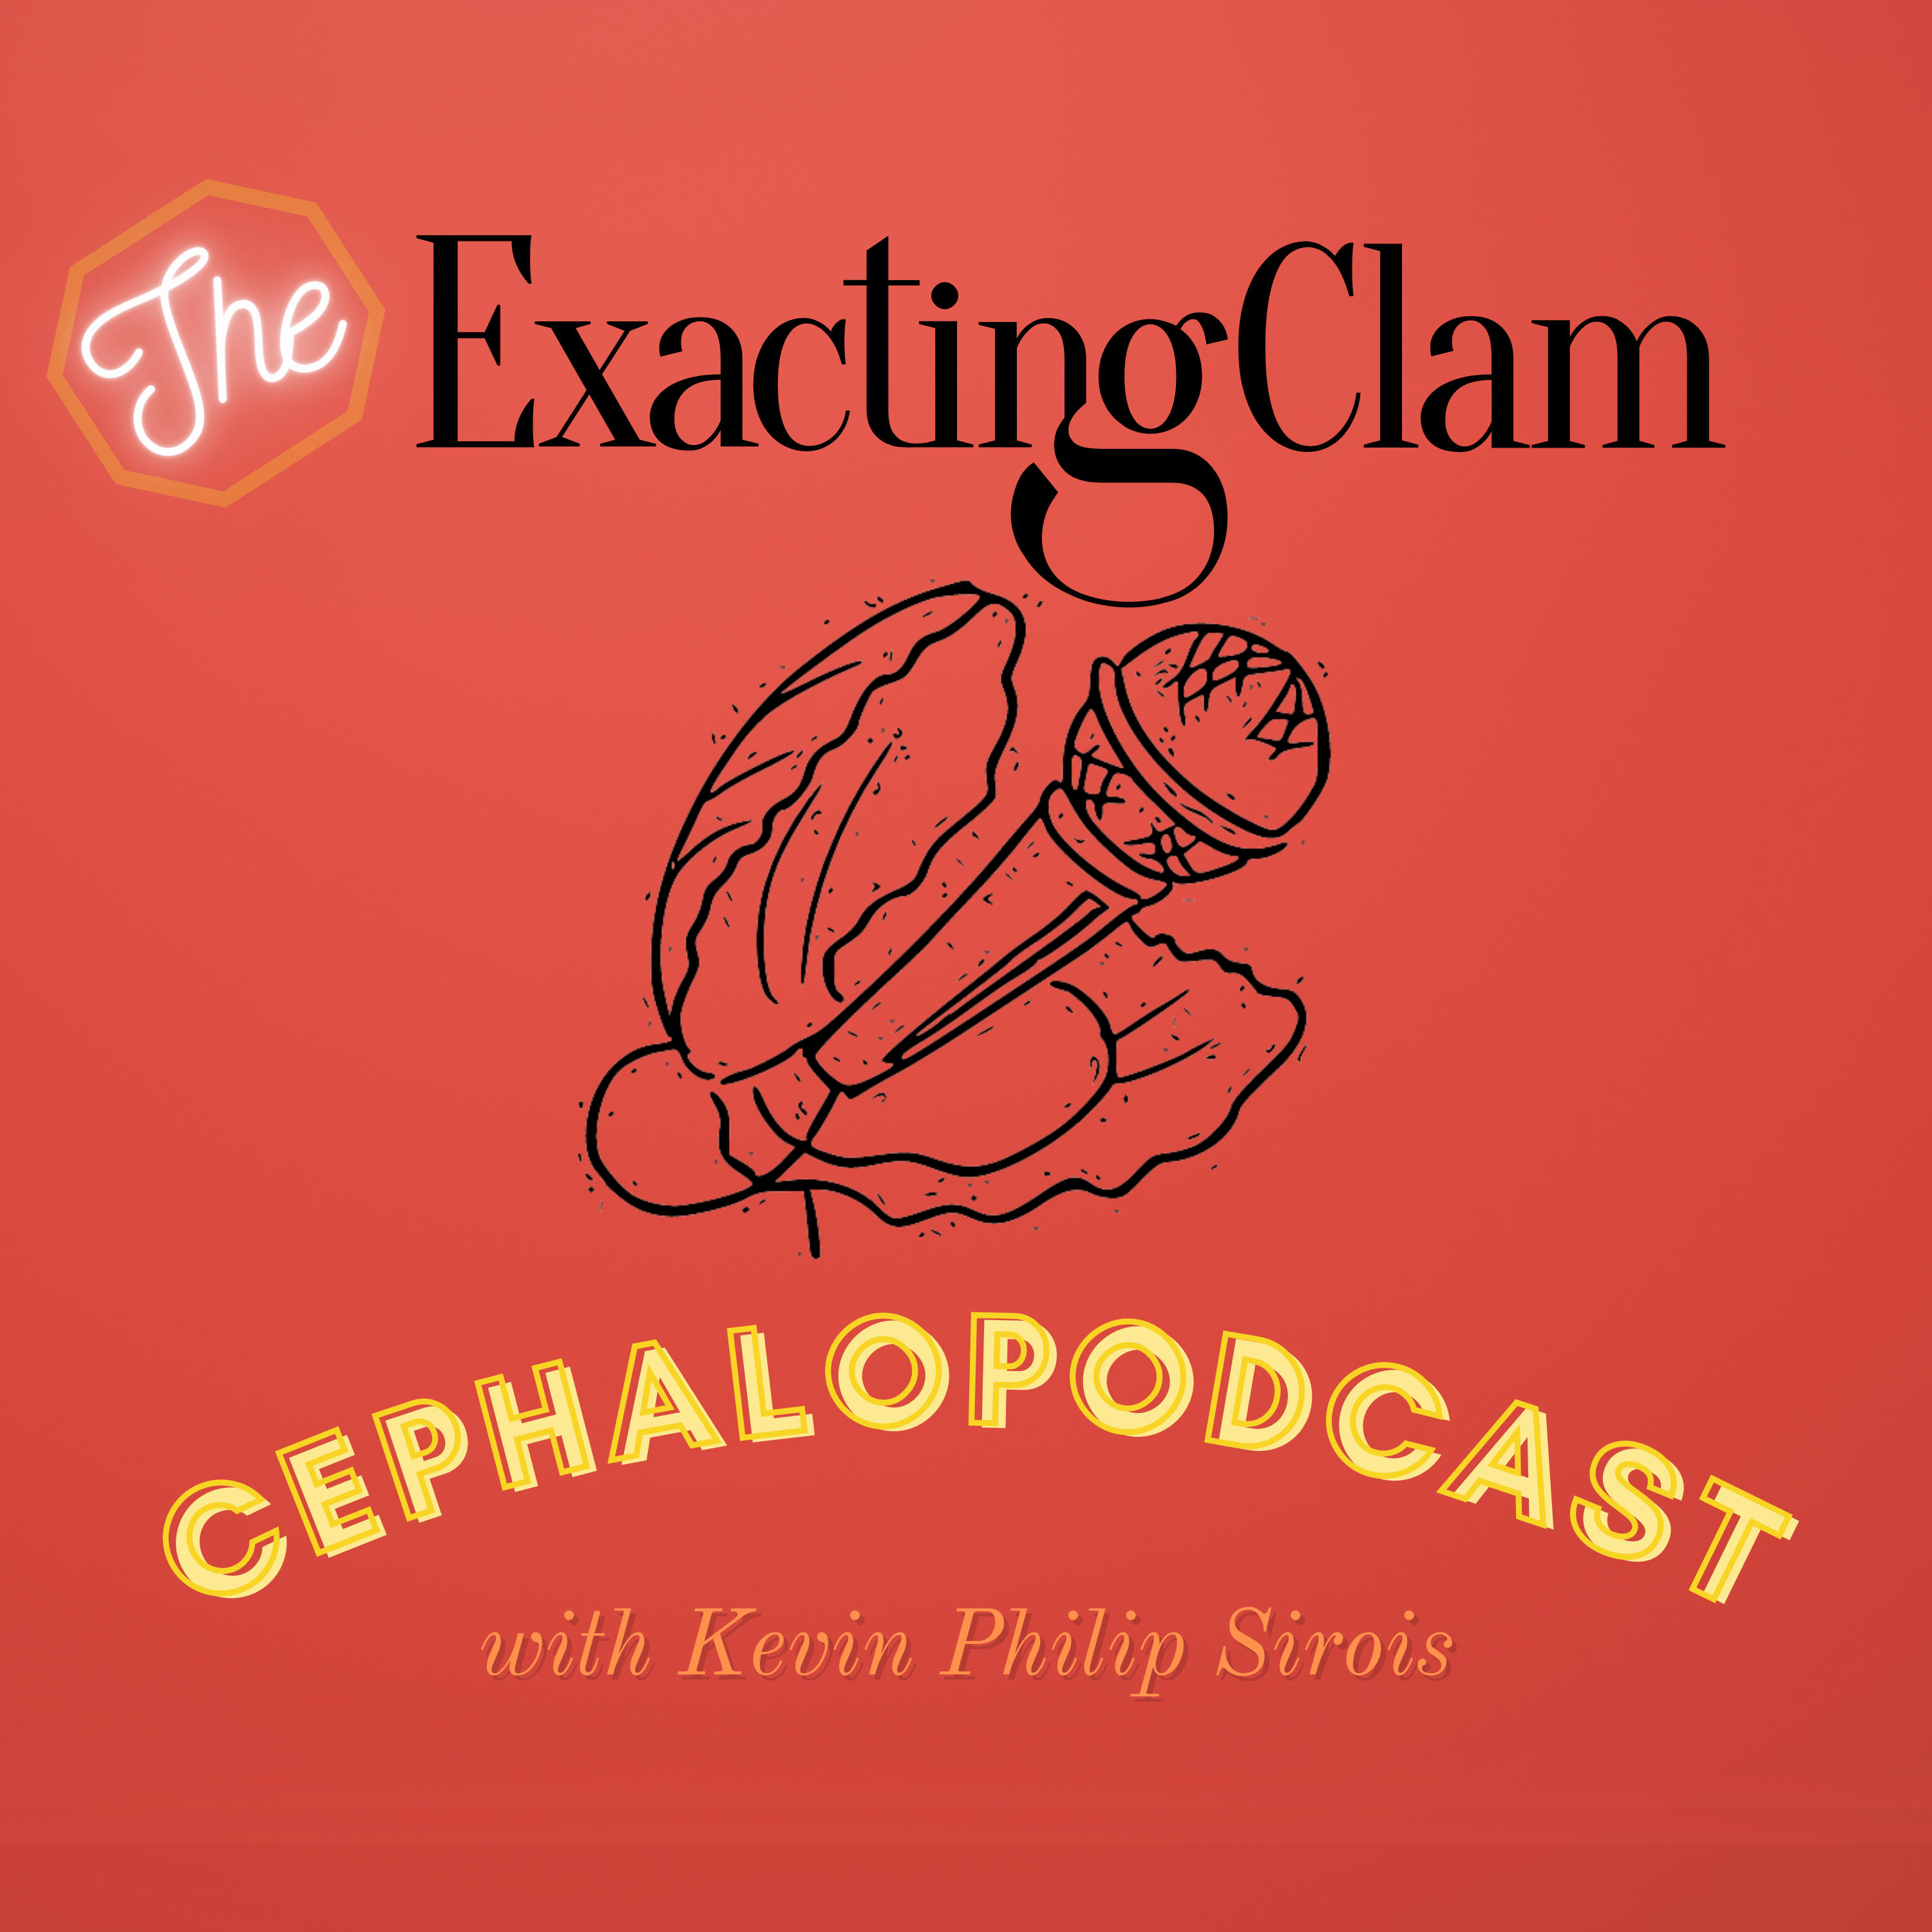 Artwork for podcast The Exacting Clam Cephalopodcast